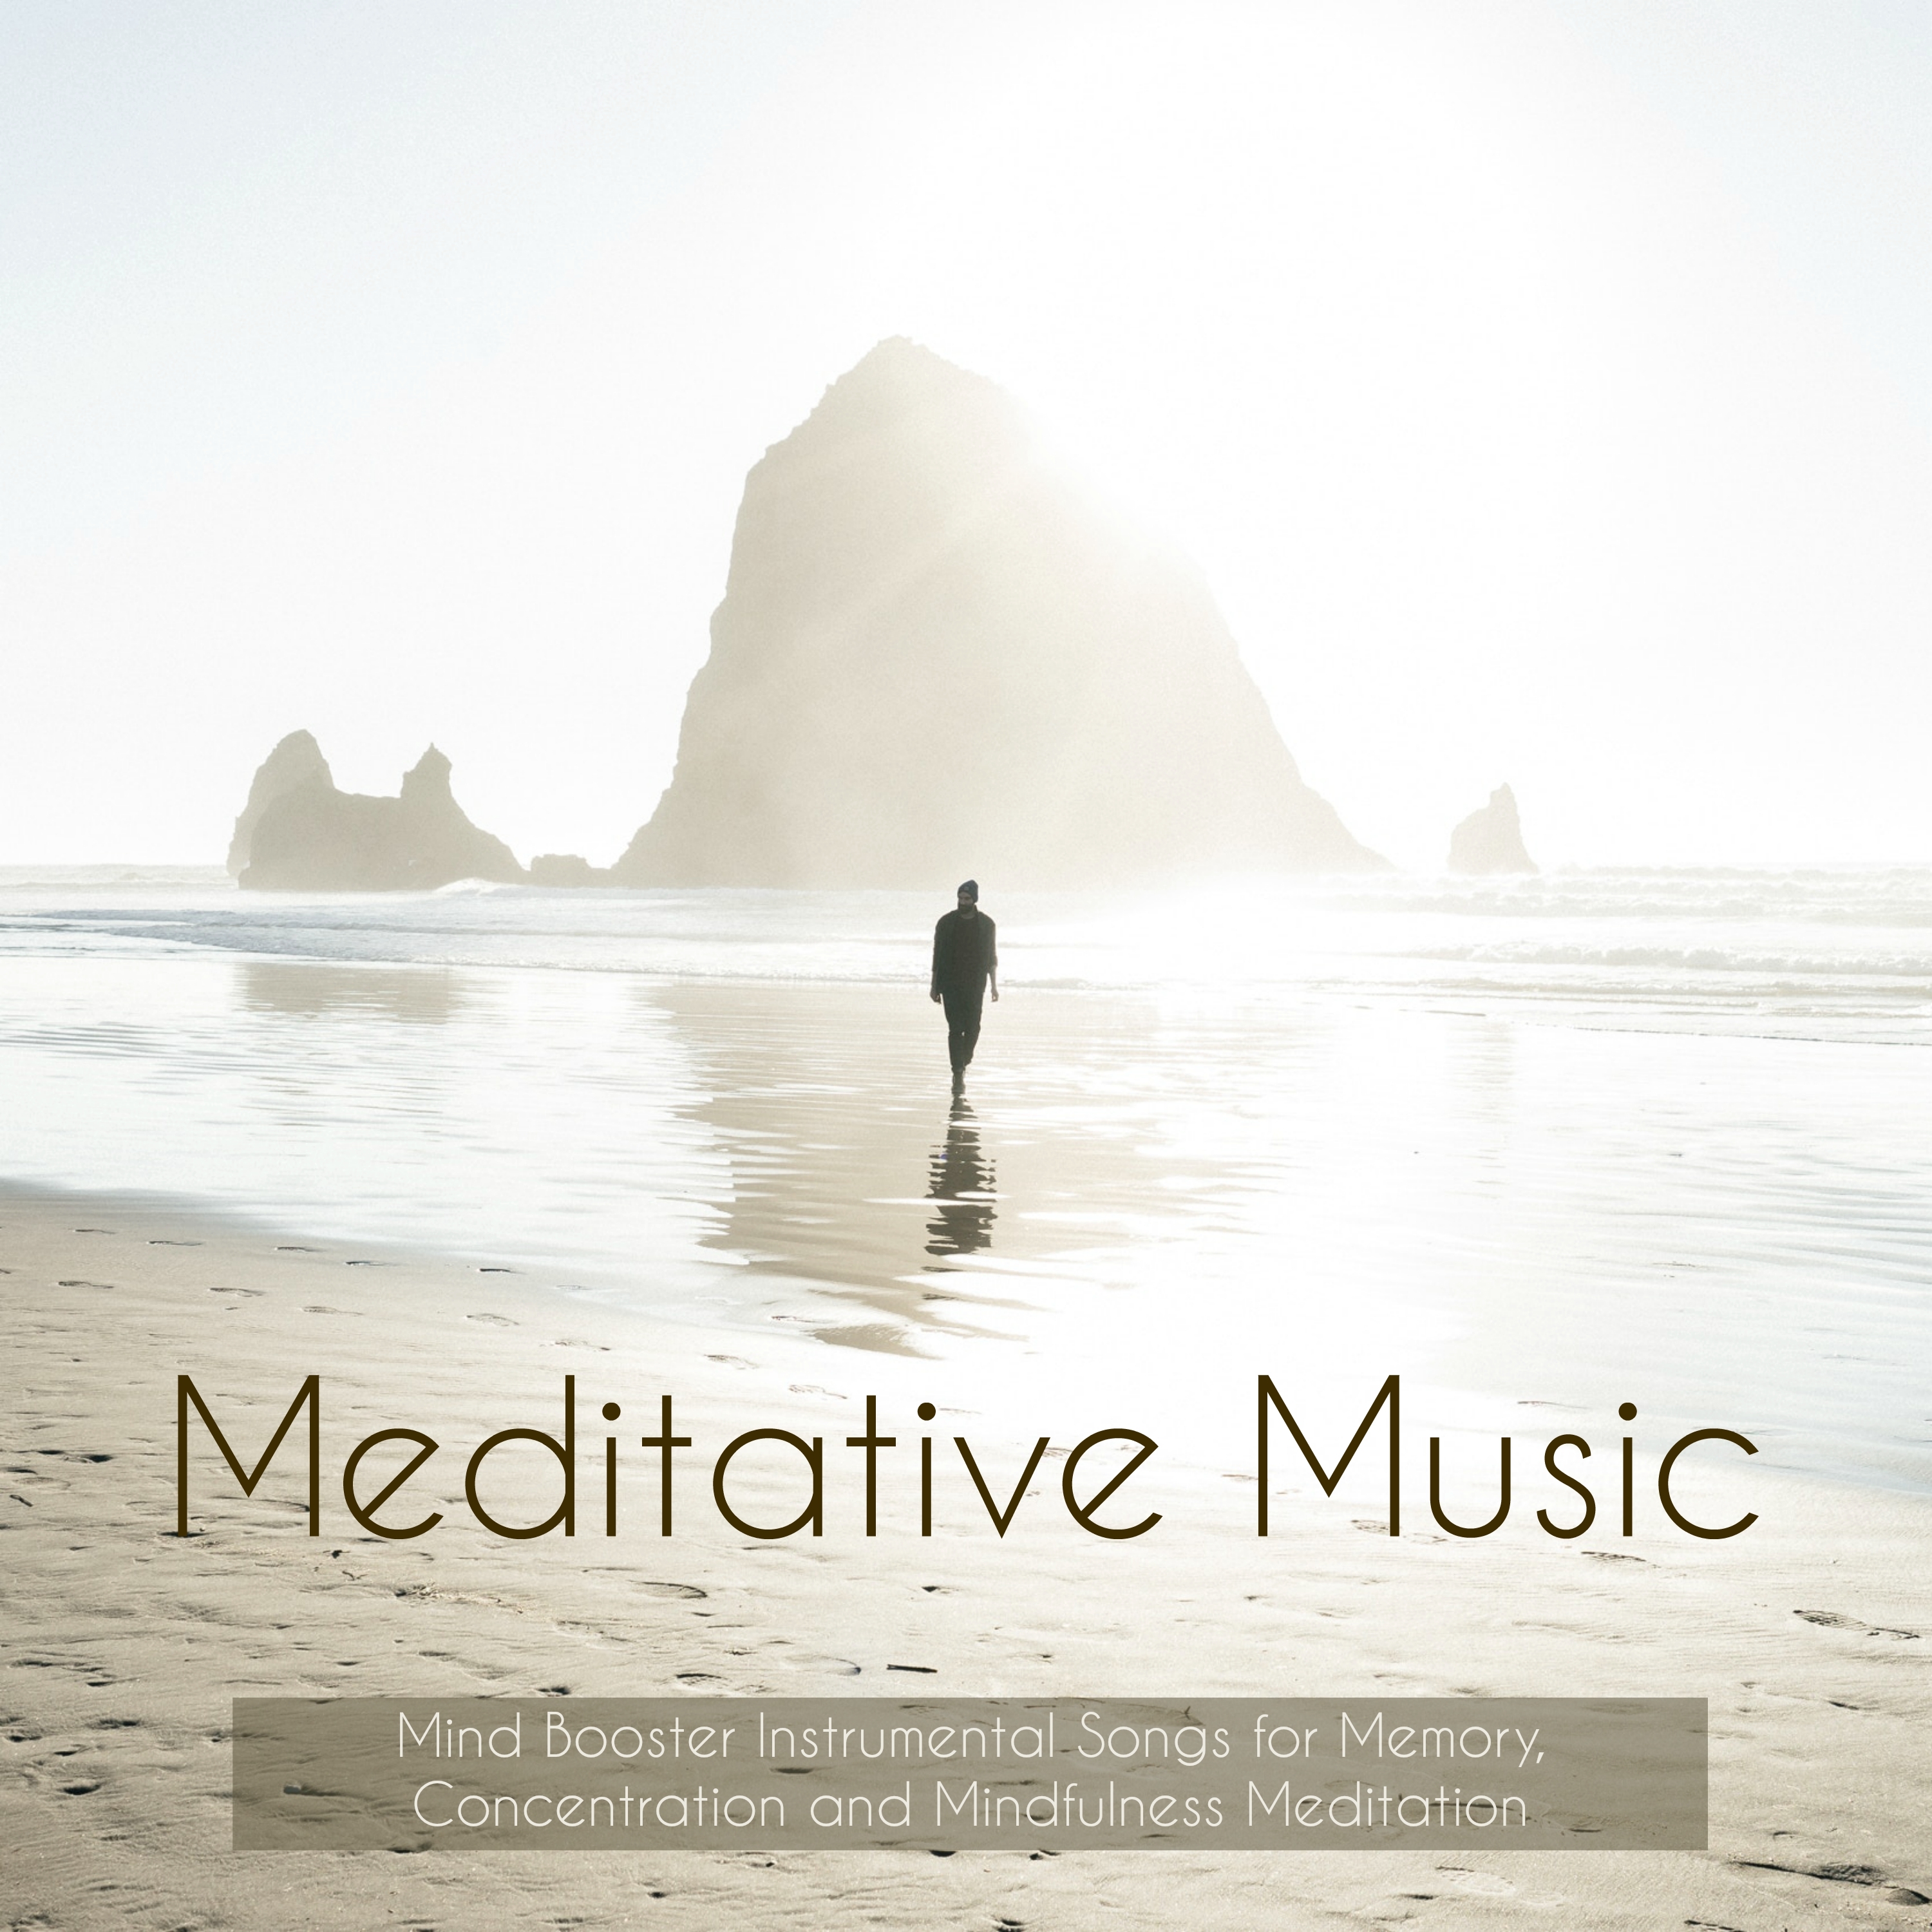 Meditative Music - Mind Booster Instrumental Songs for Memory, Concentration and Mindfulness Meditation